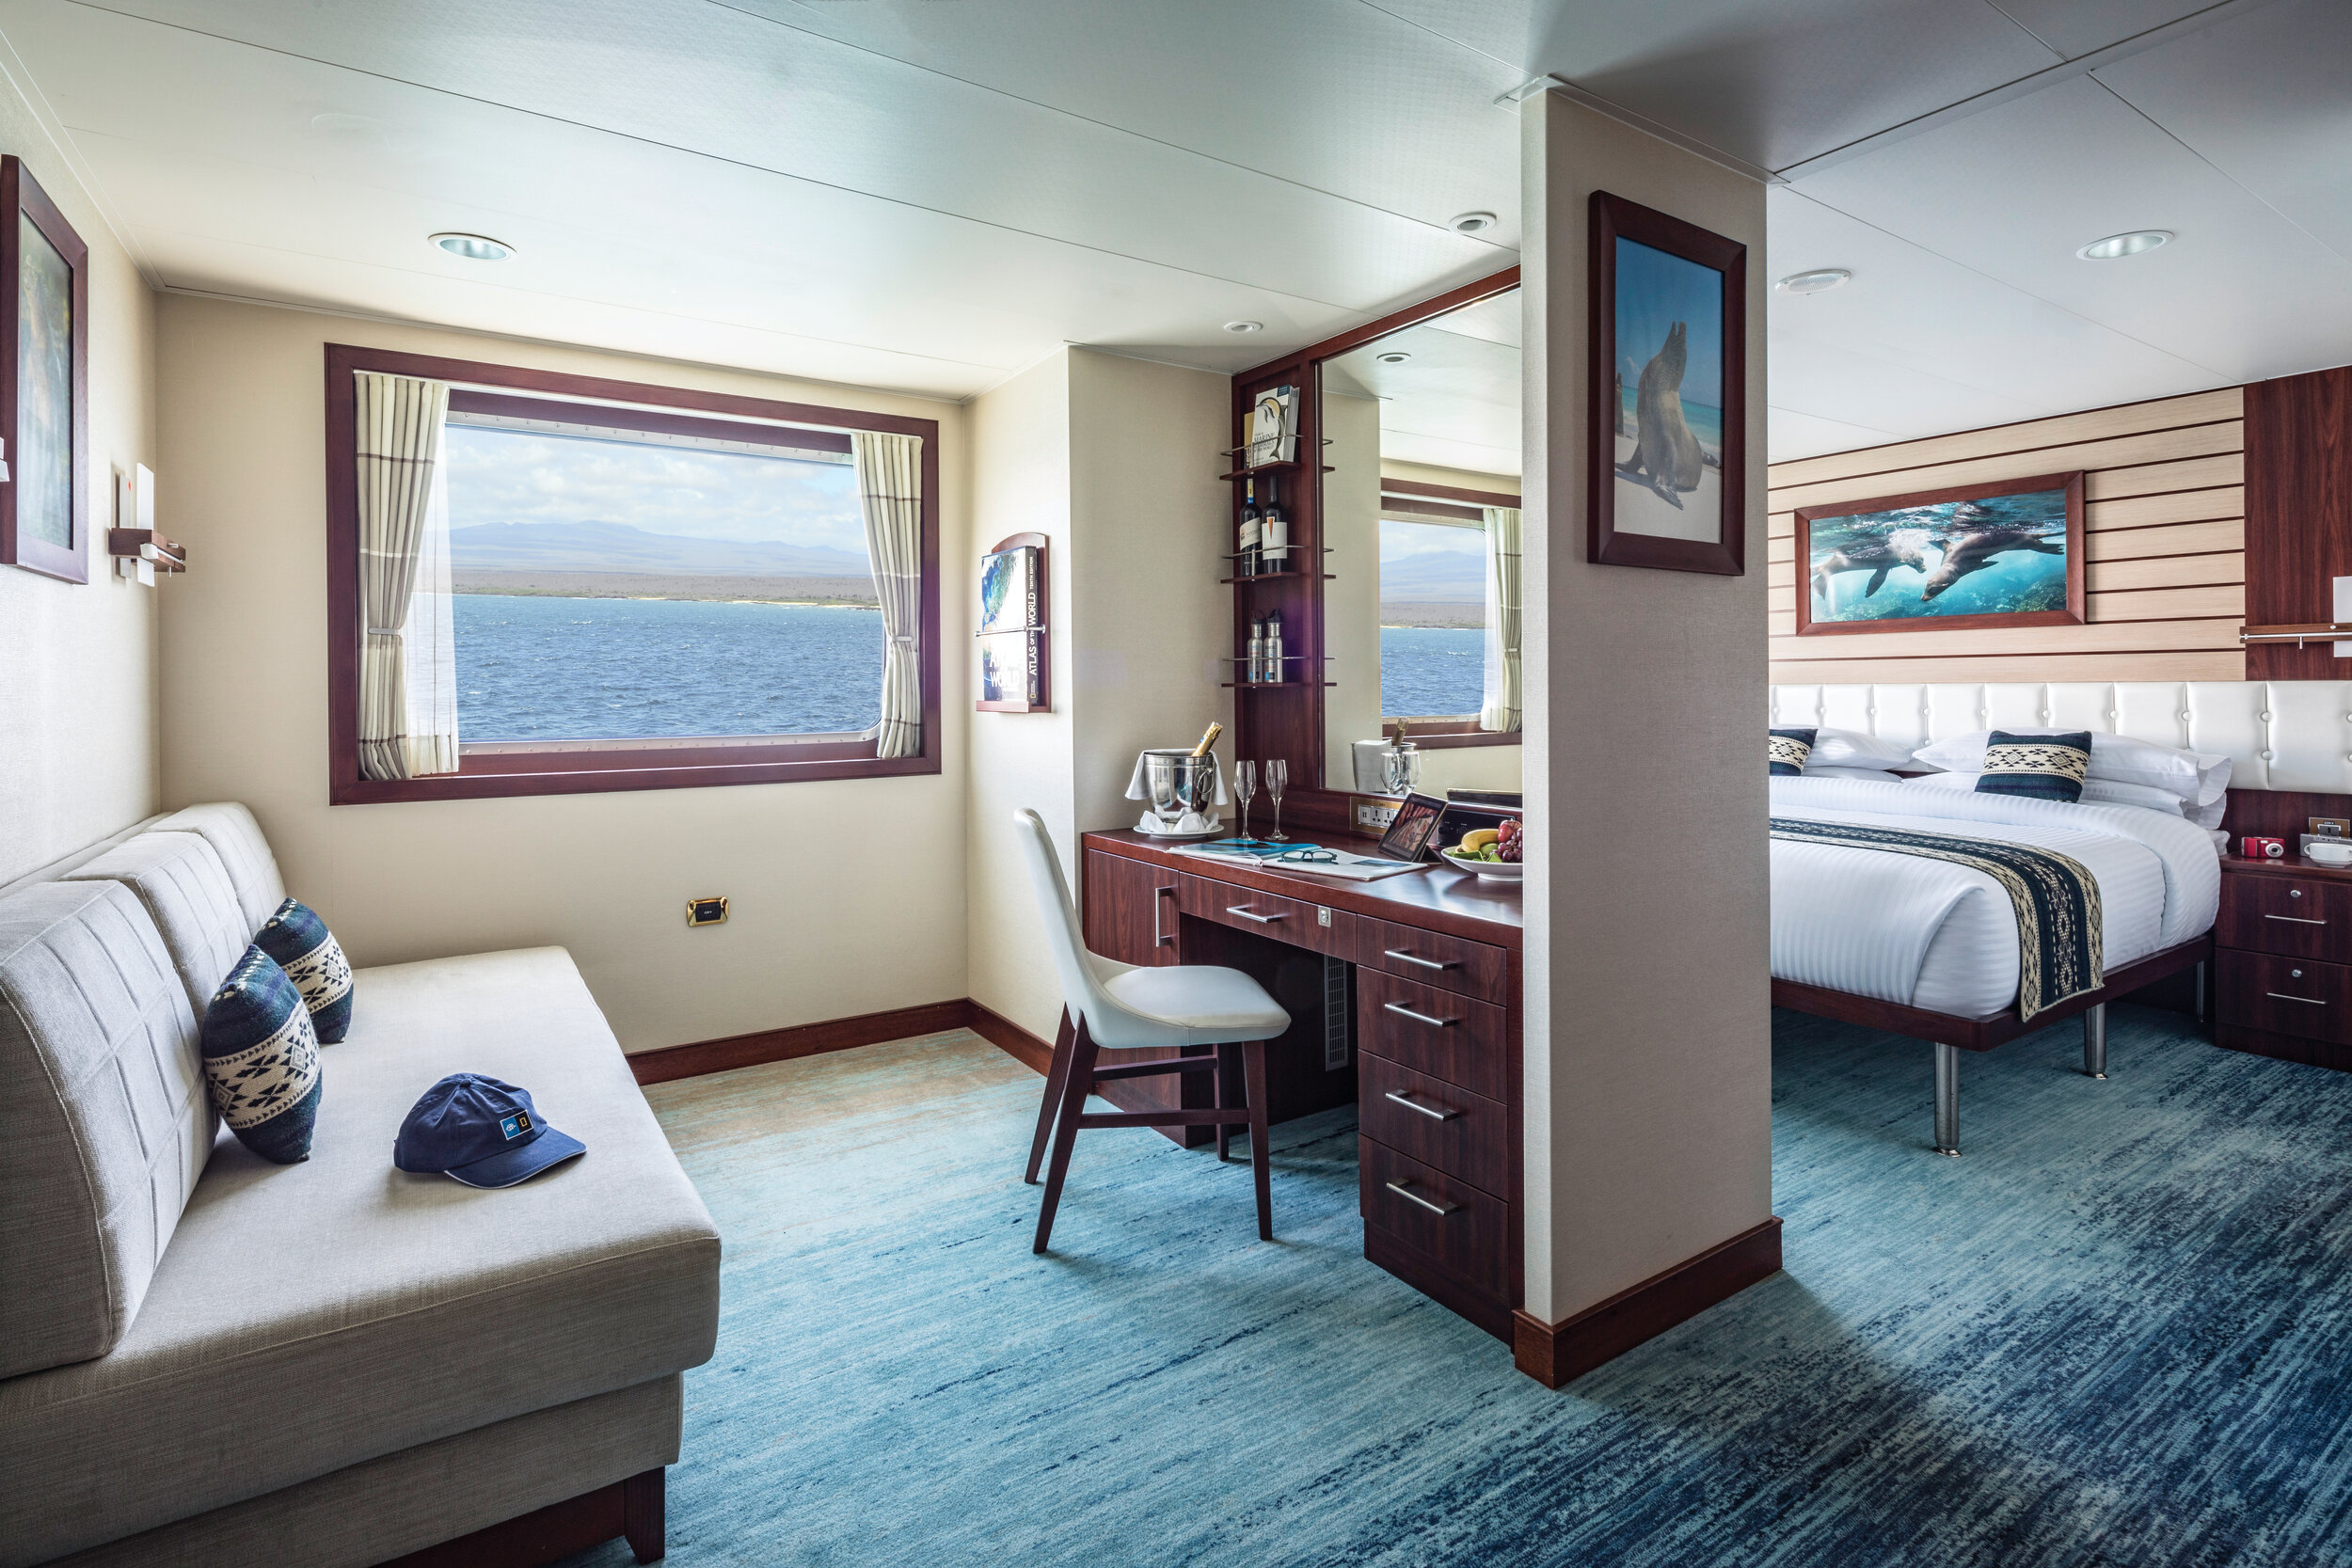   A suite onboard the National Geographic Endeavour II (photo credit: Lindblad Expeditions)  